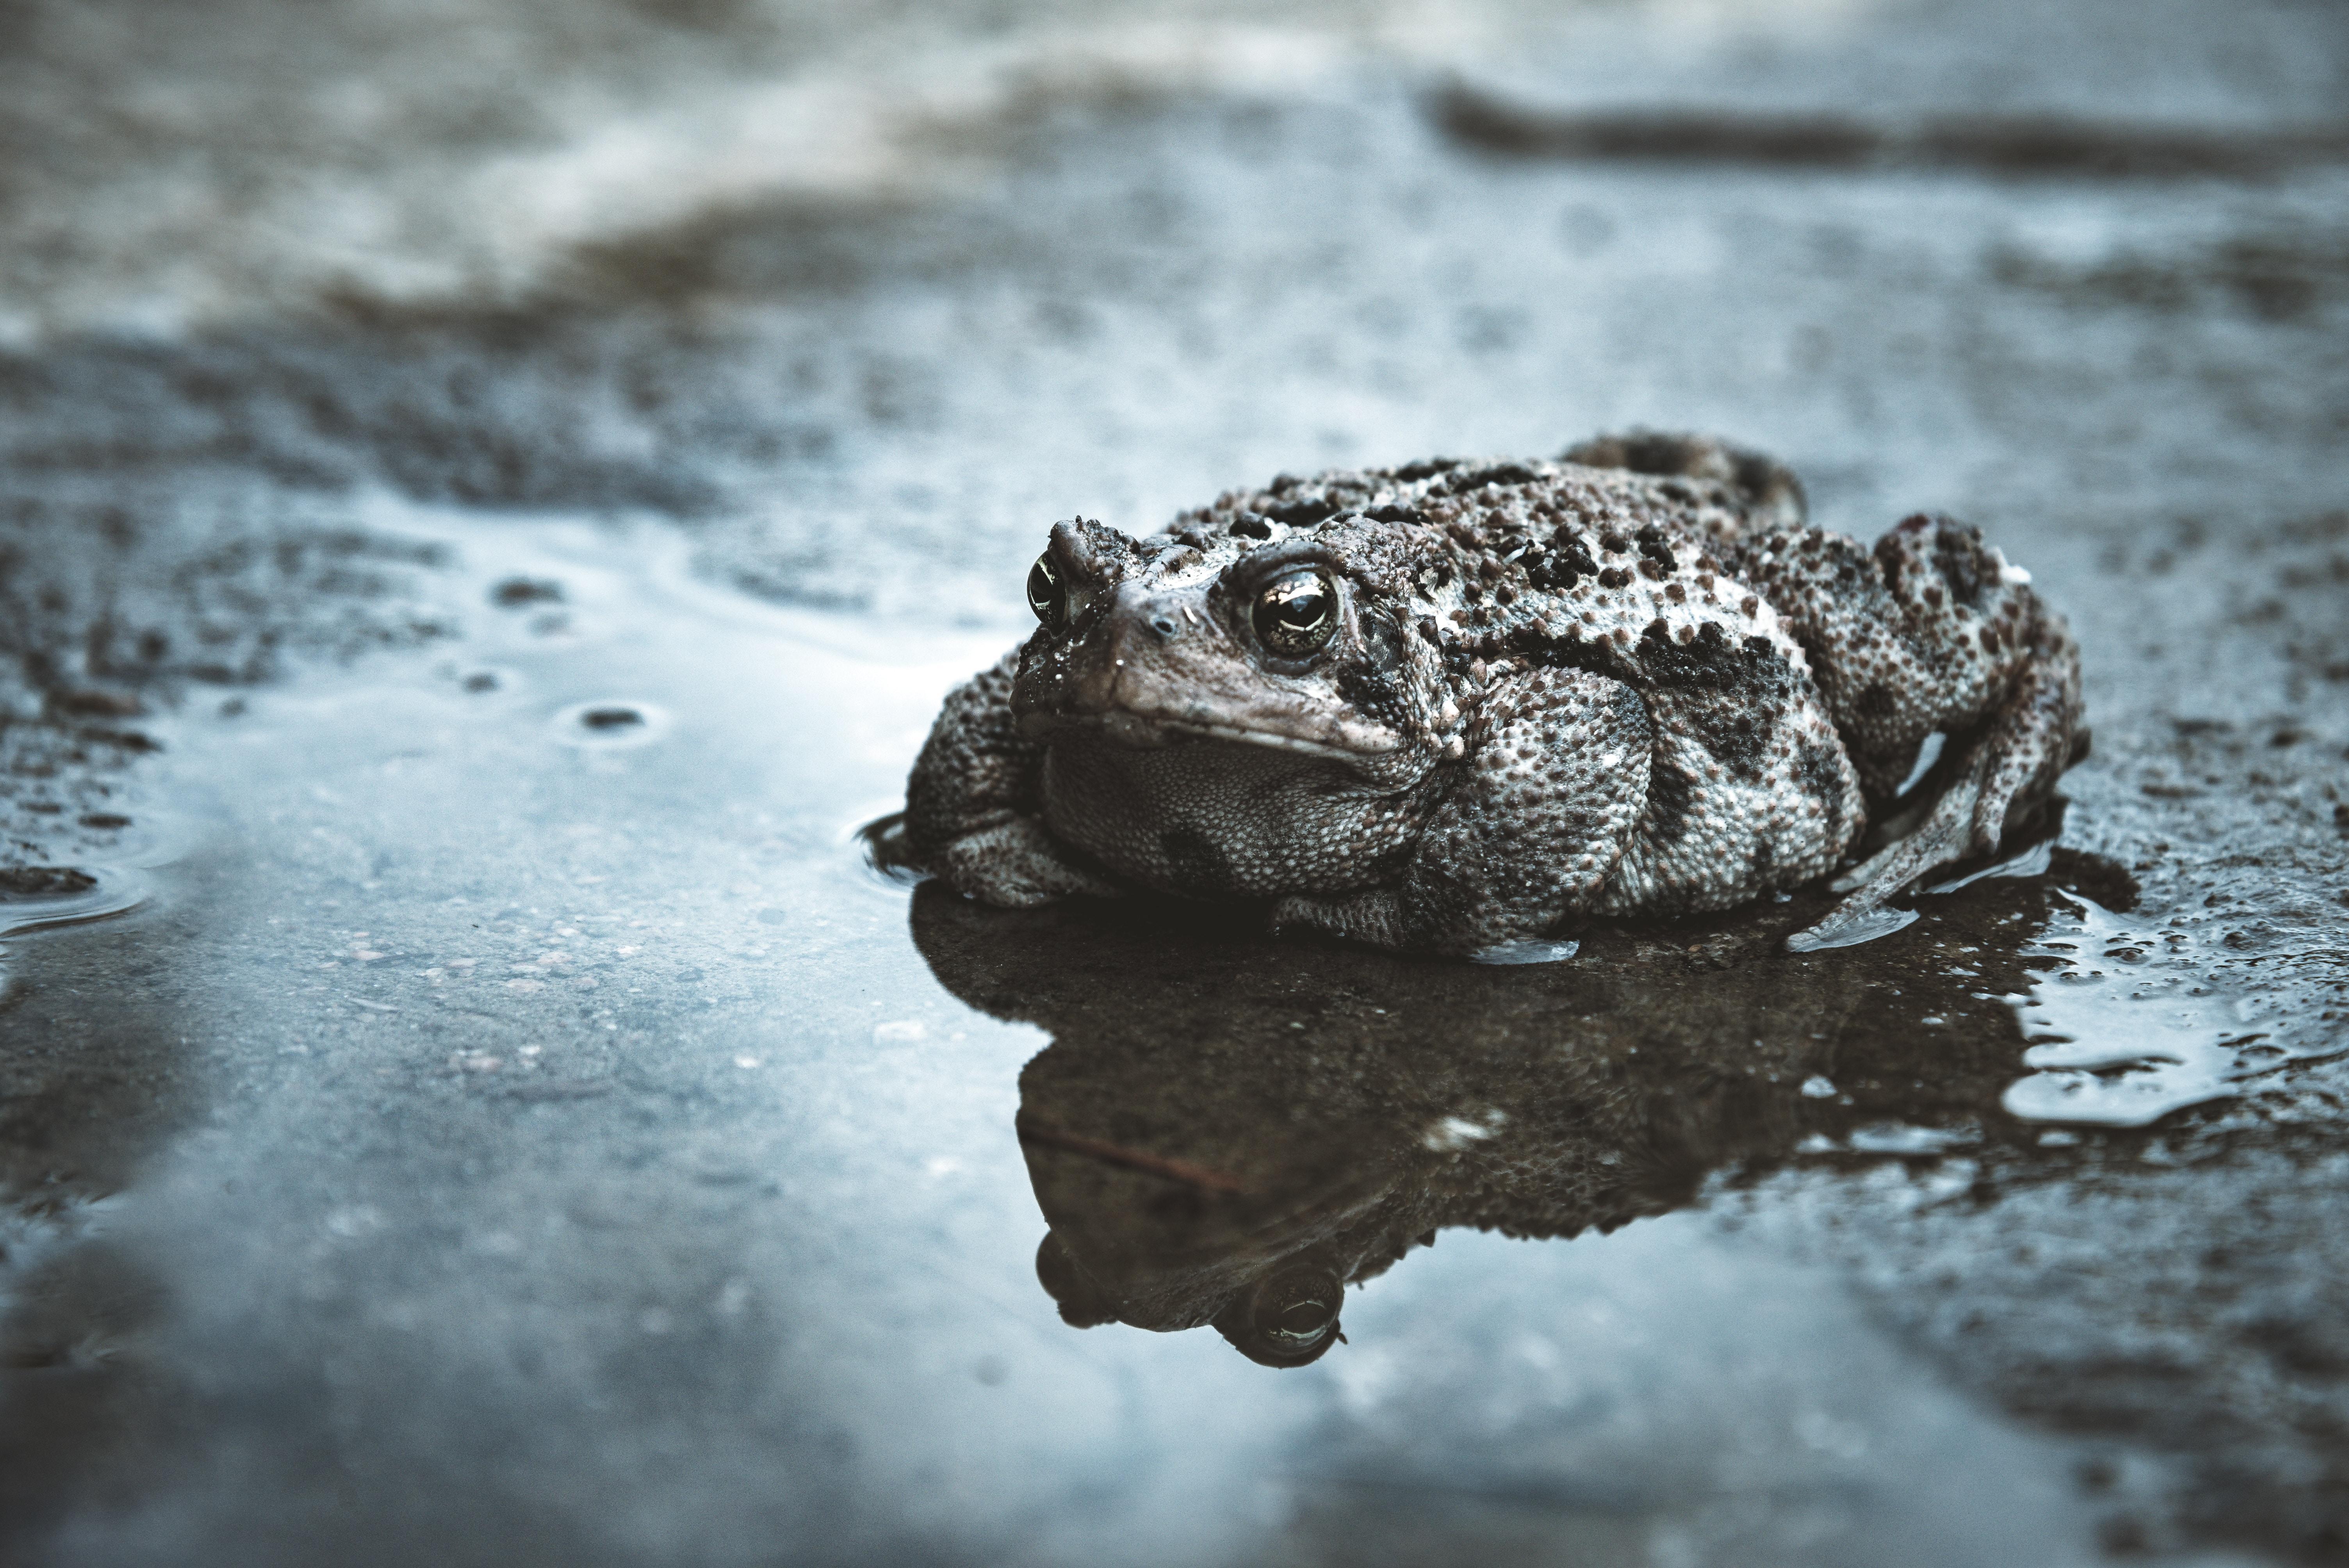 Toads Wallpaper Iphone, Amphibians Wallpapers, Animal